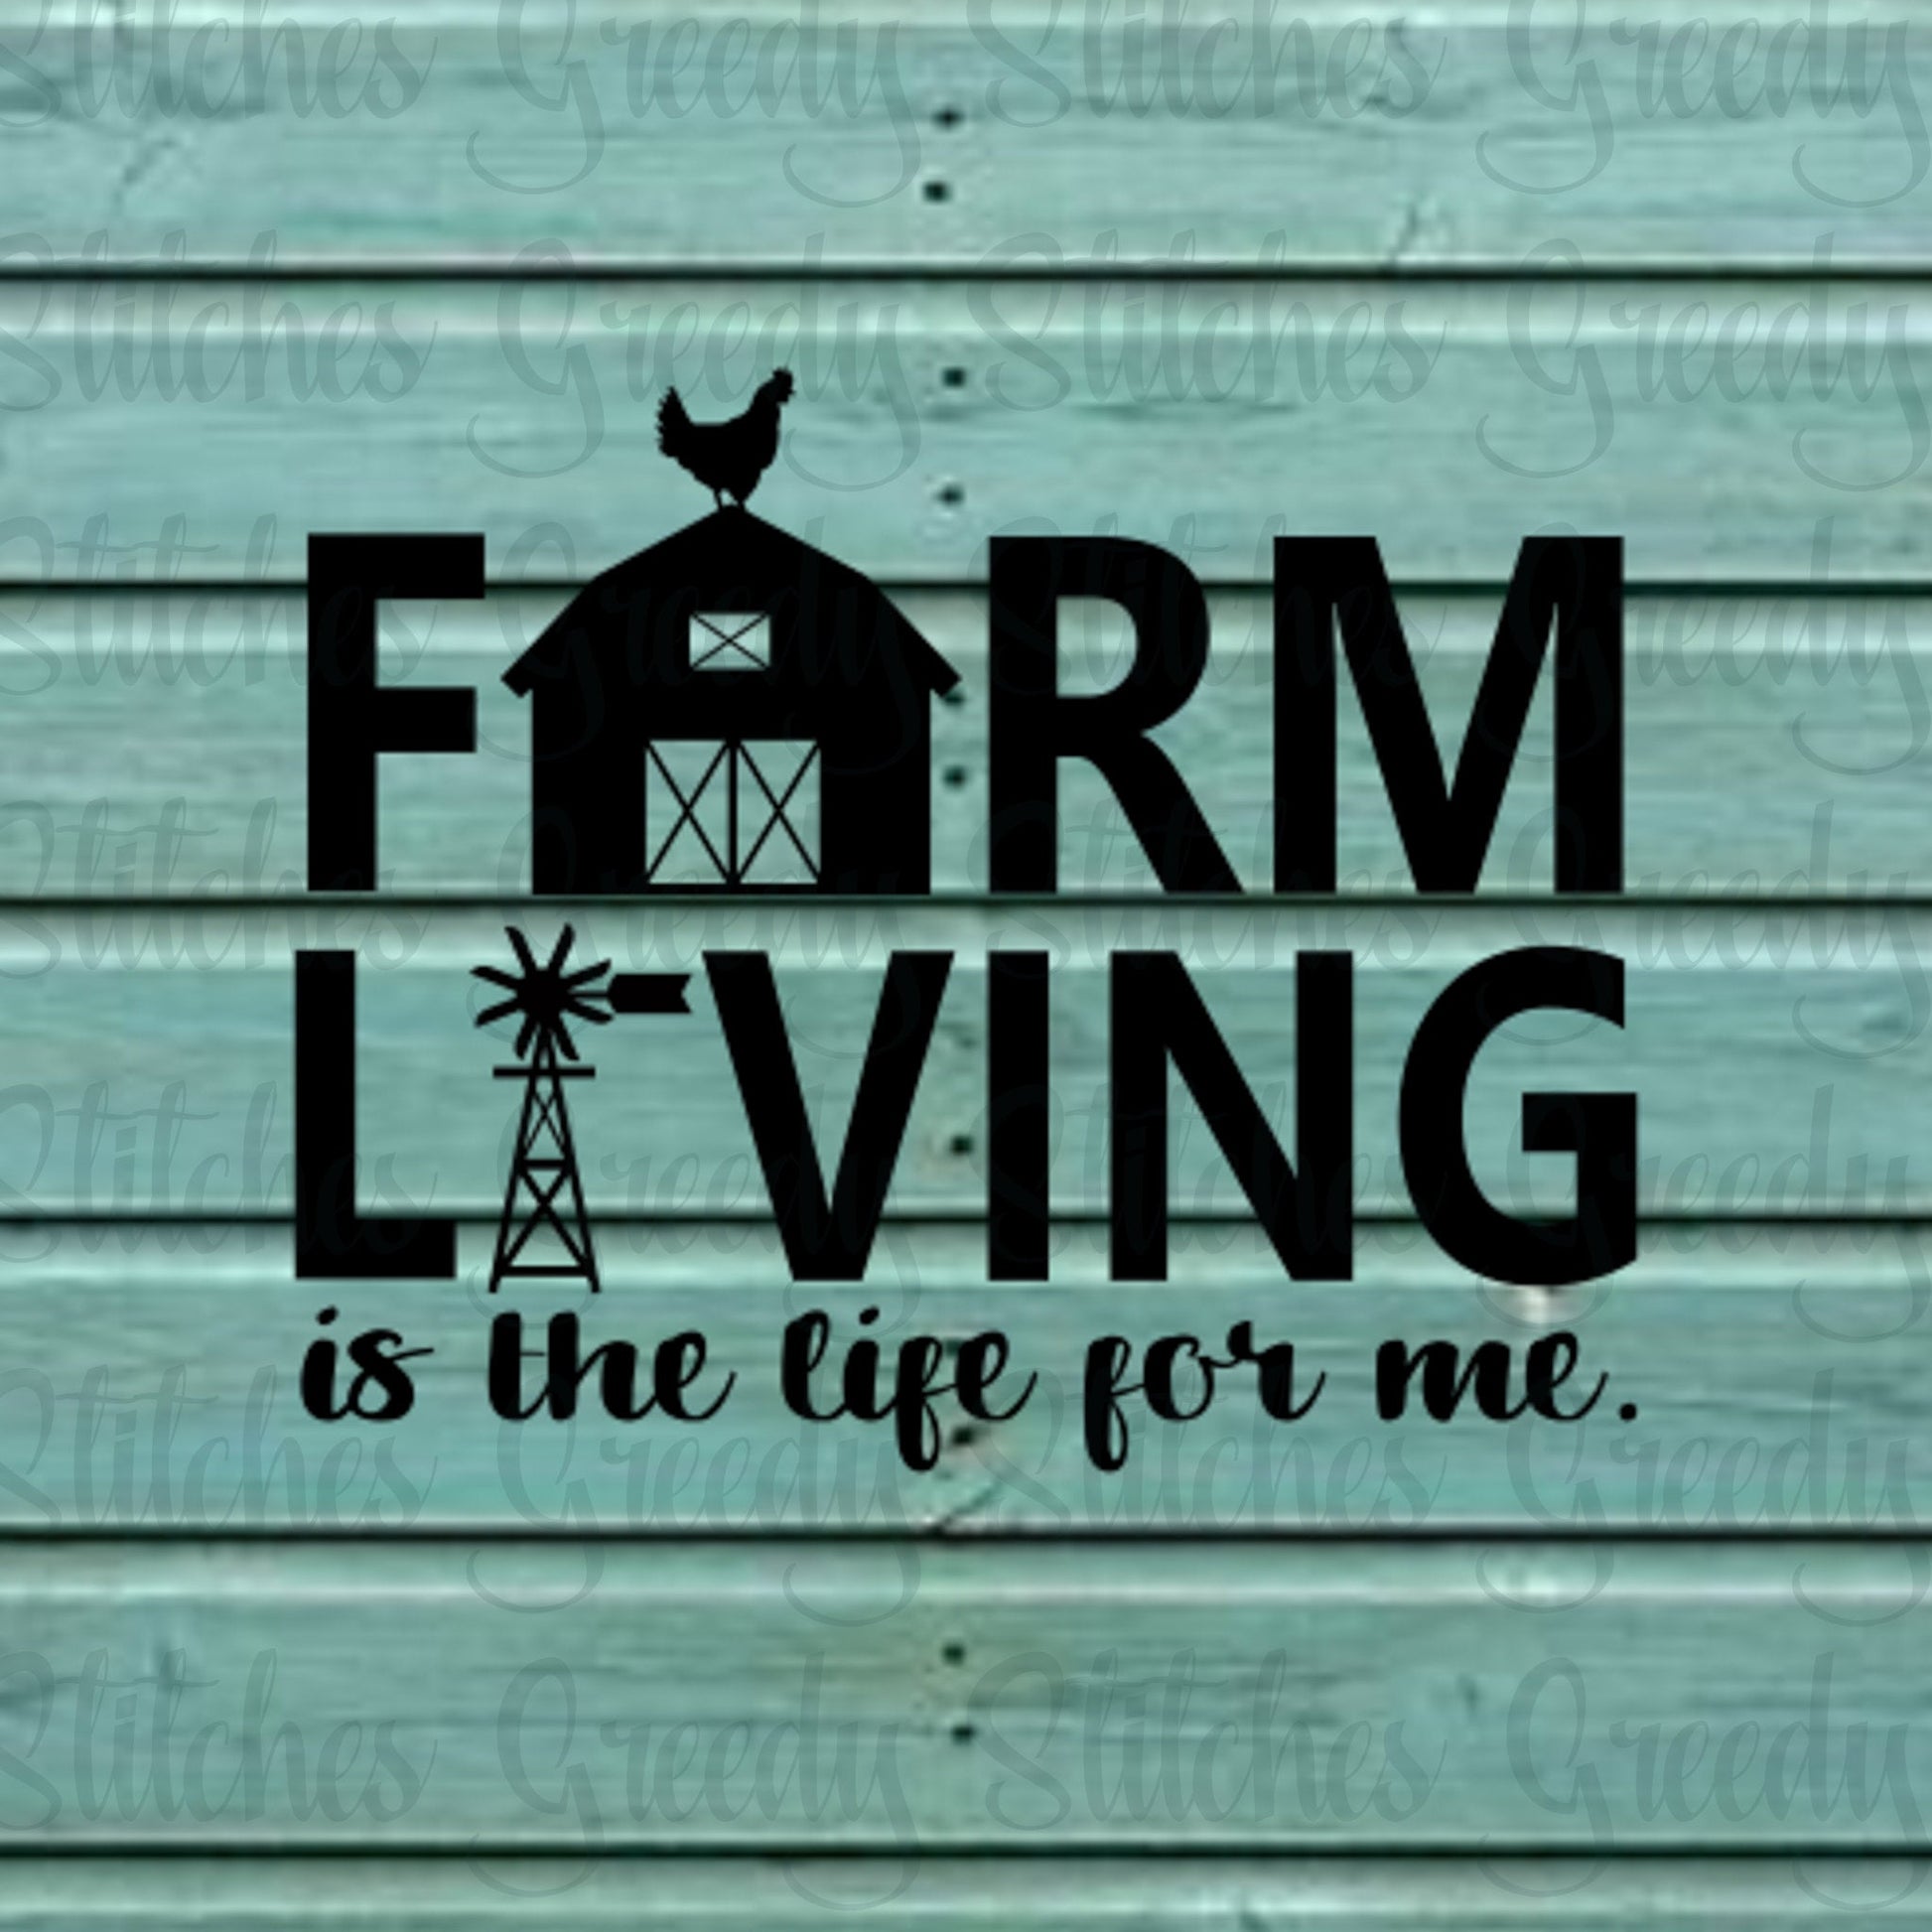 Farm Living Is The Life For Me SVG | Farm Life SvG | Farm svg, dxf, eps, png. Farmer SVG | Farm SvG | Farming SvG Instant Download Cut File.